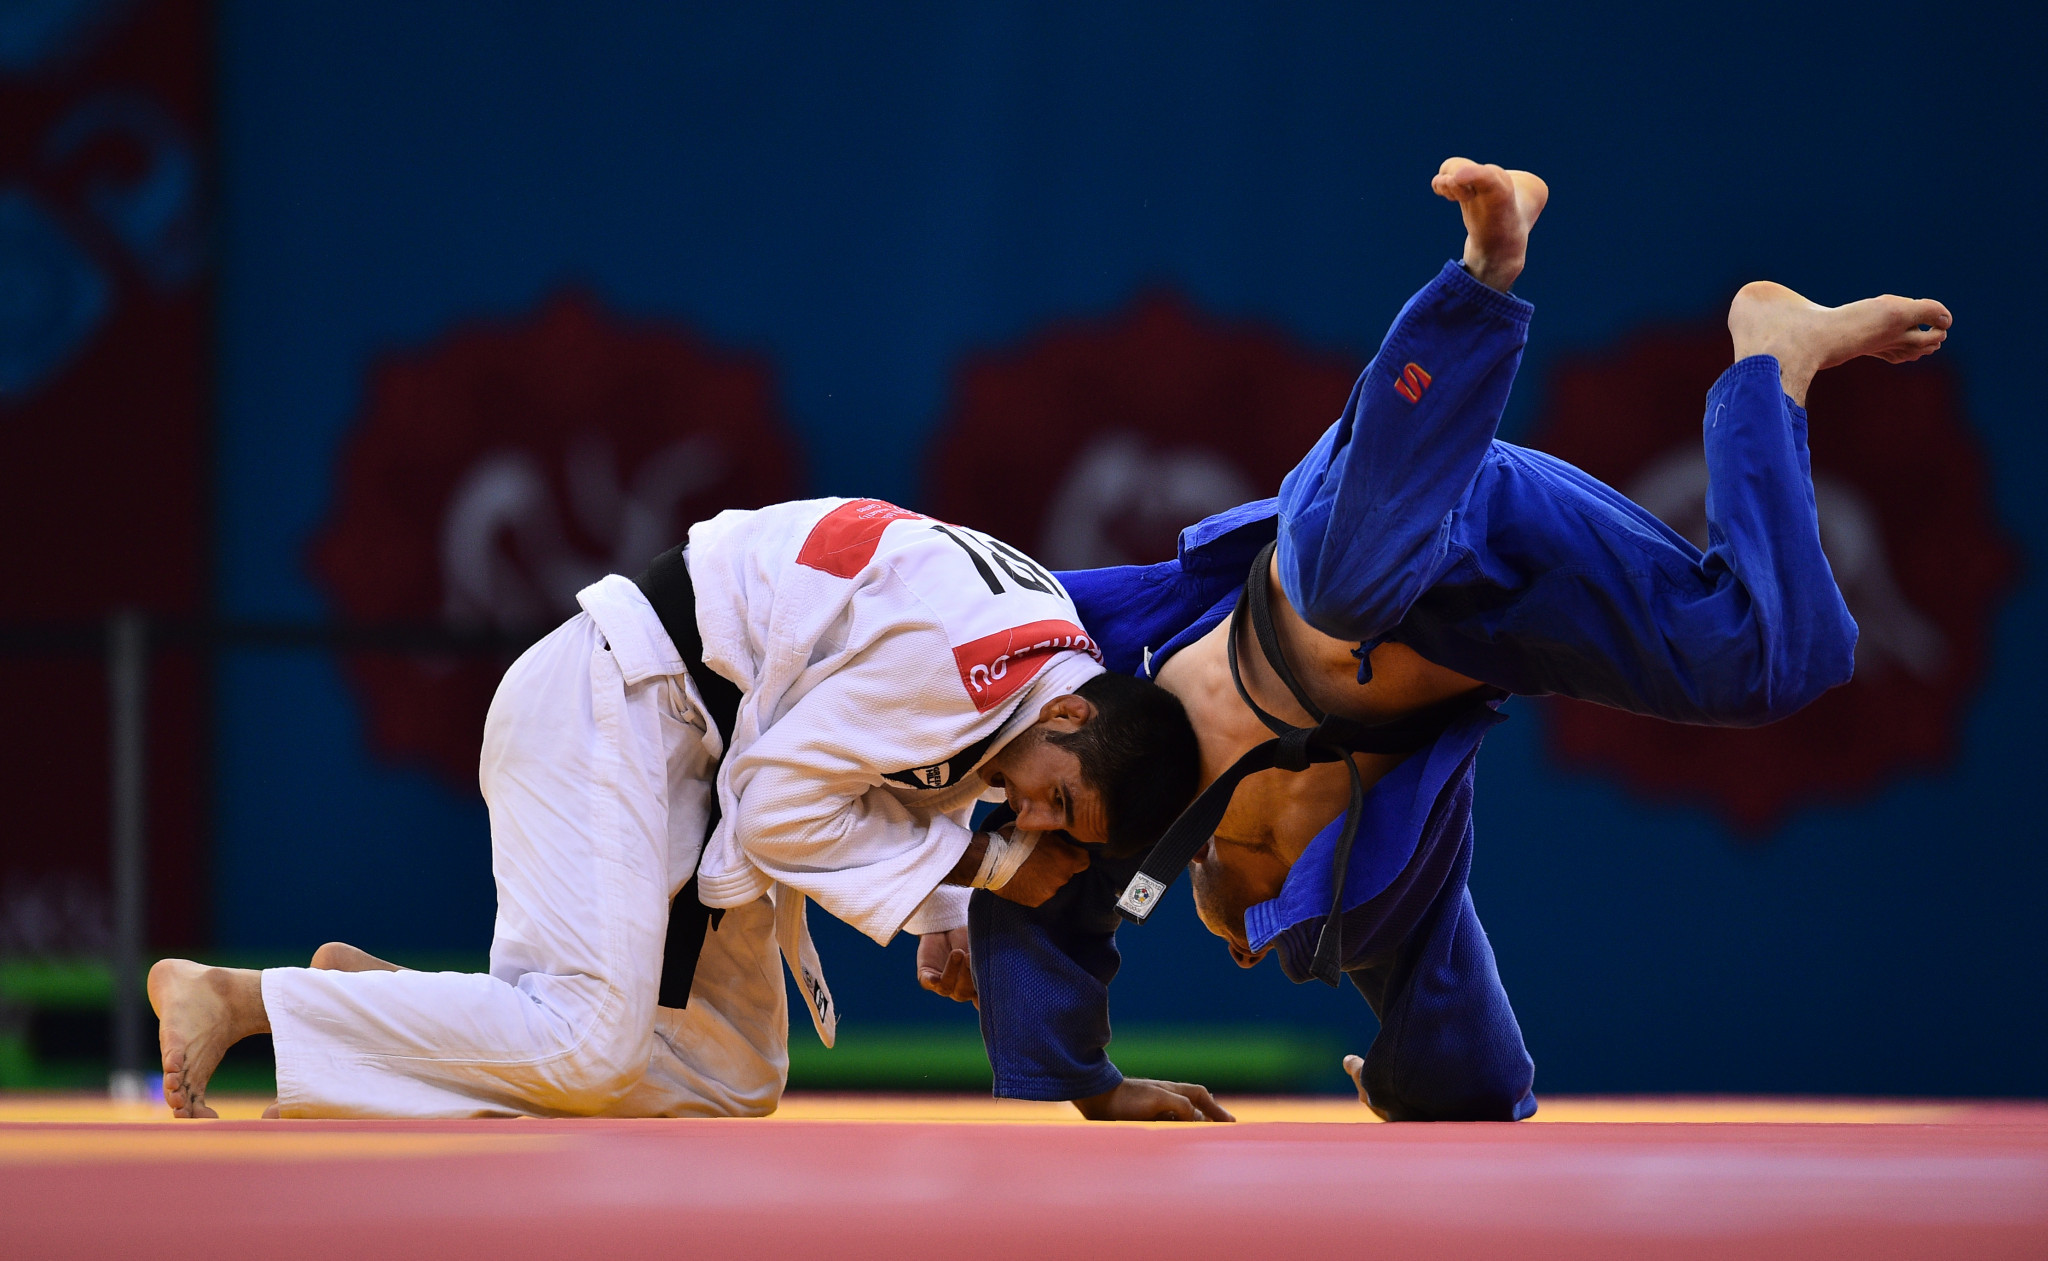 Esther Stam previously commentated on the International Judo Federation World Championships in September ©Getty Images